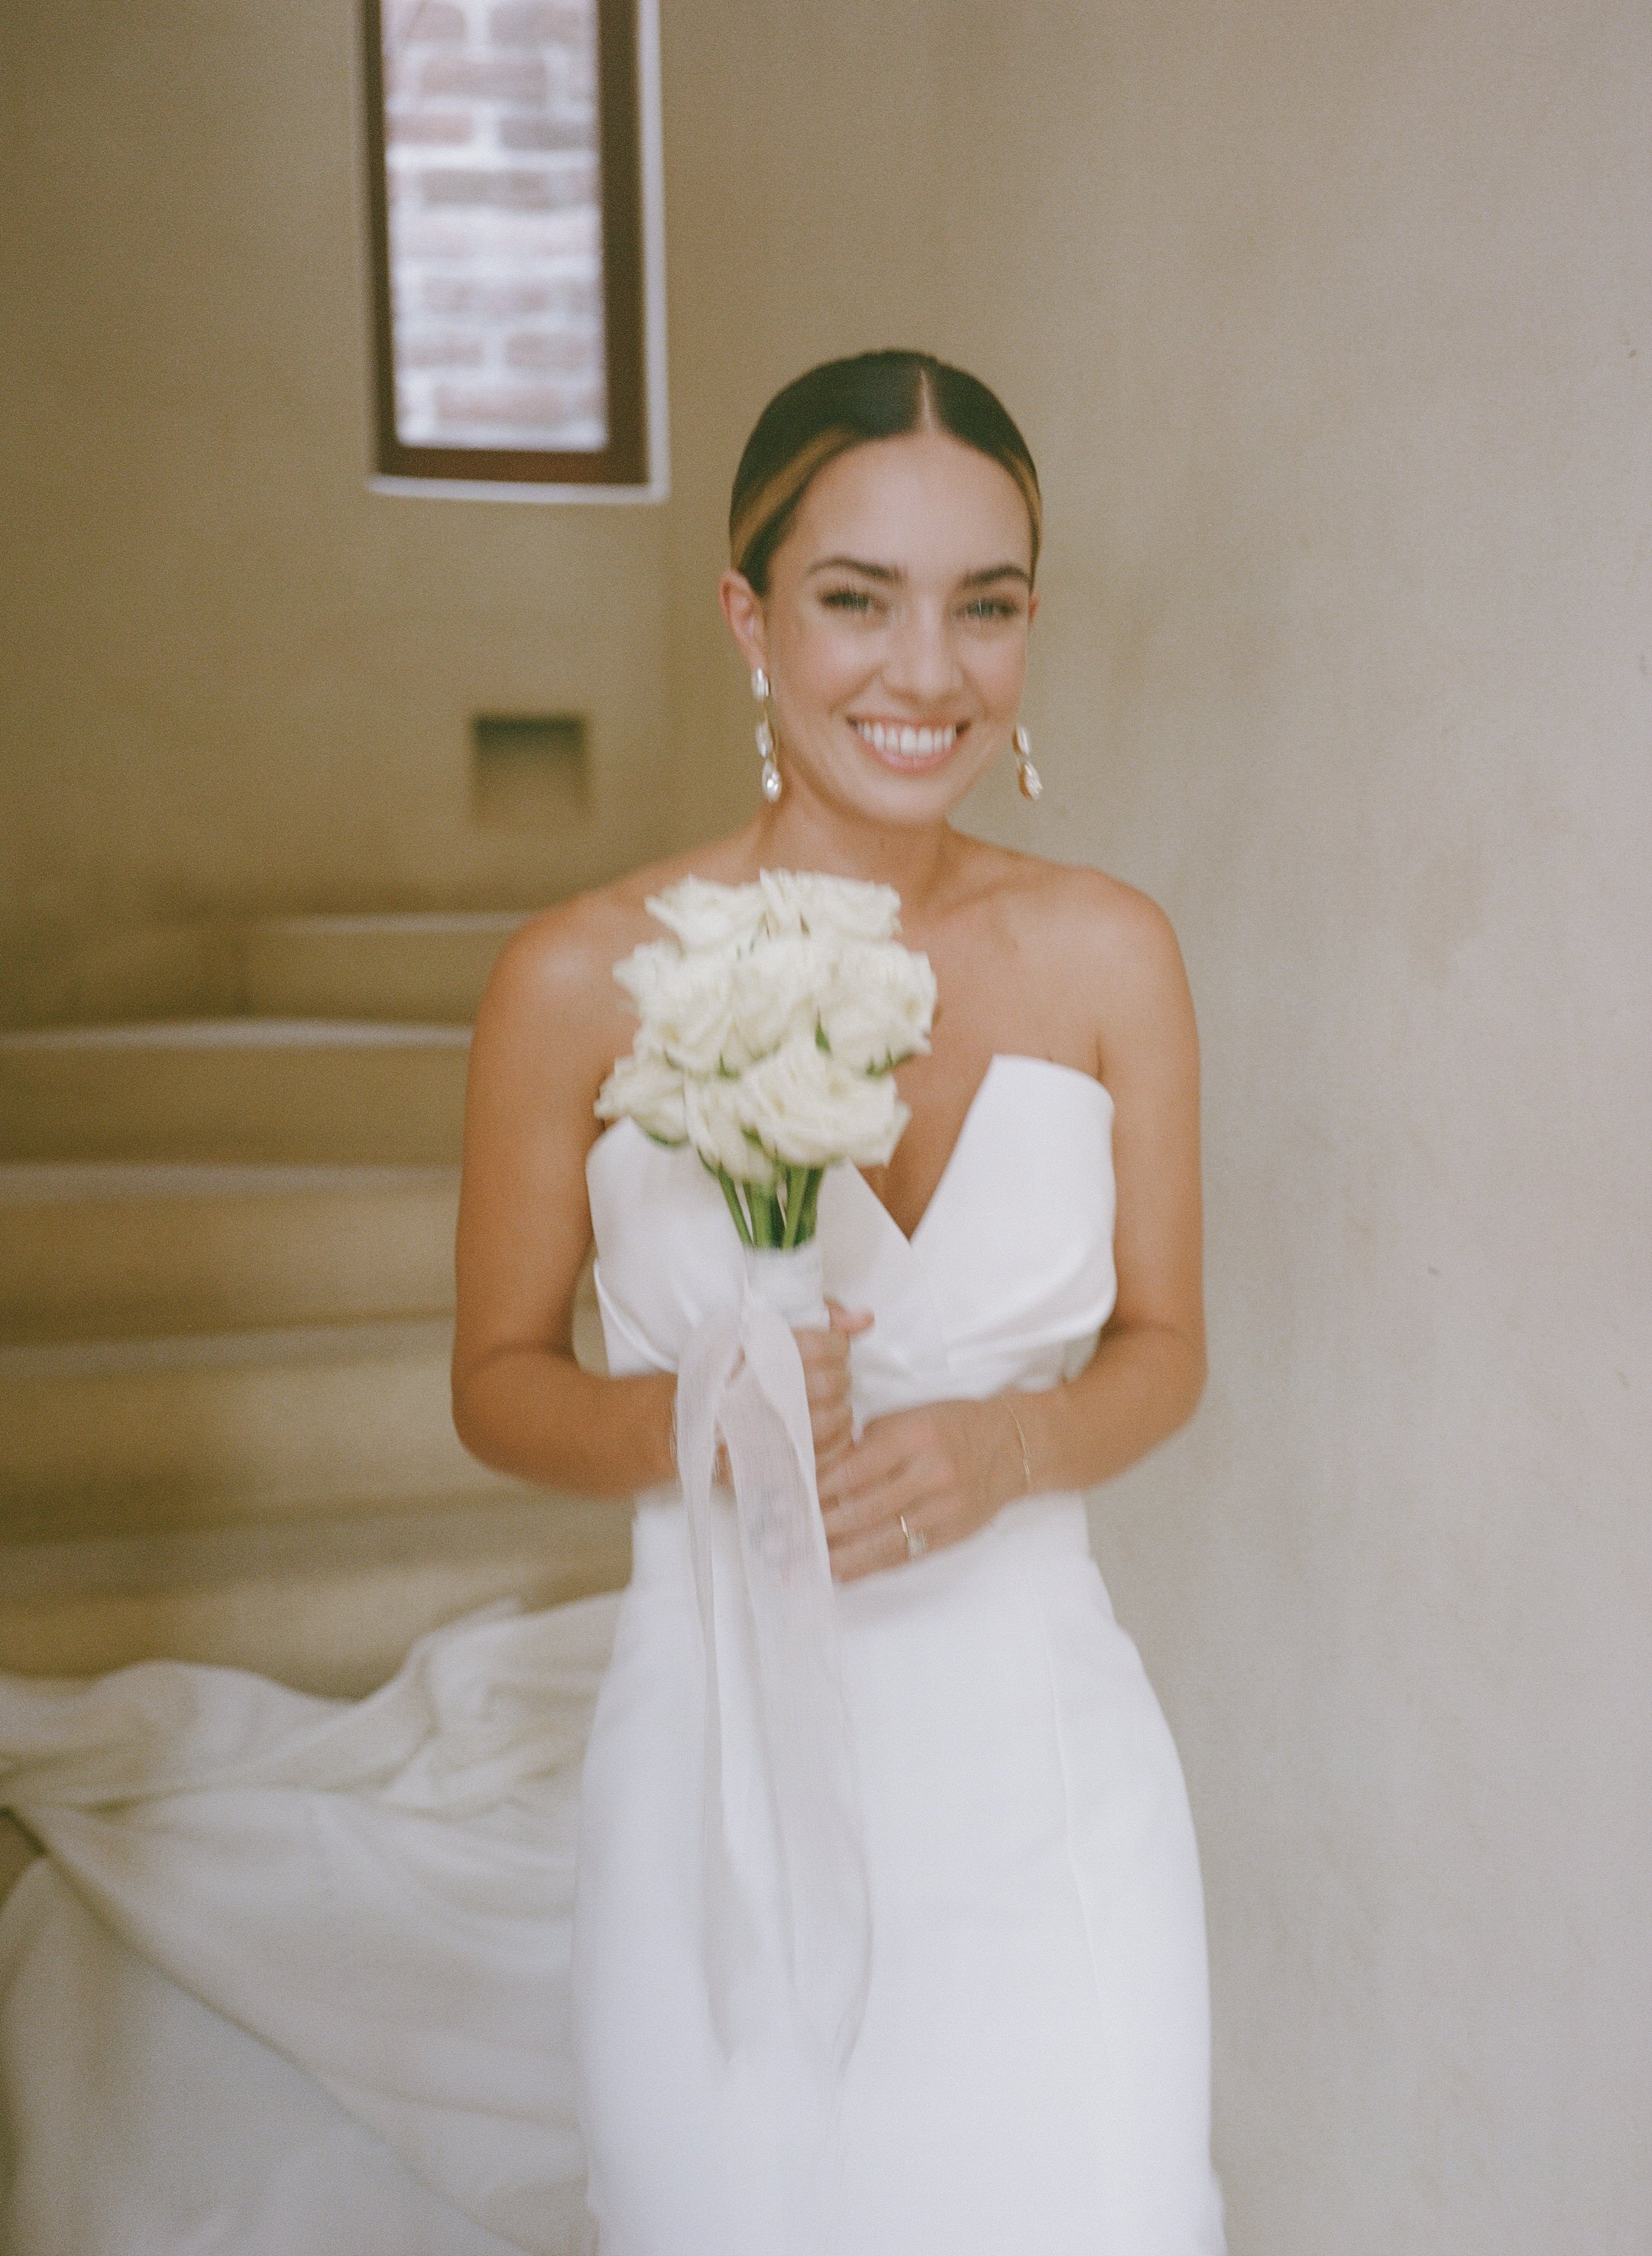 bride from florida plans the chic and tropical destination wedding of her dreams in mexico